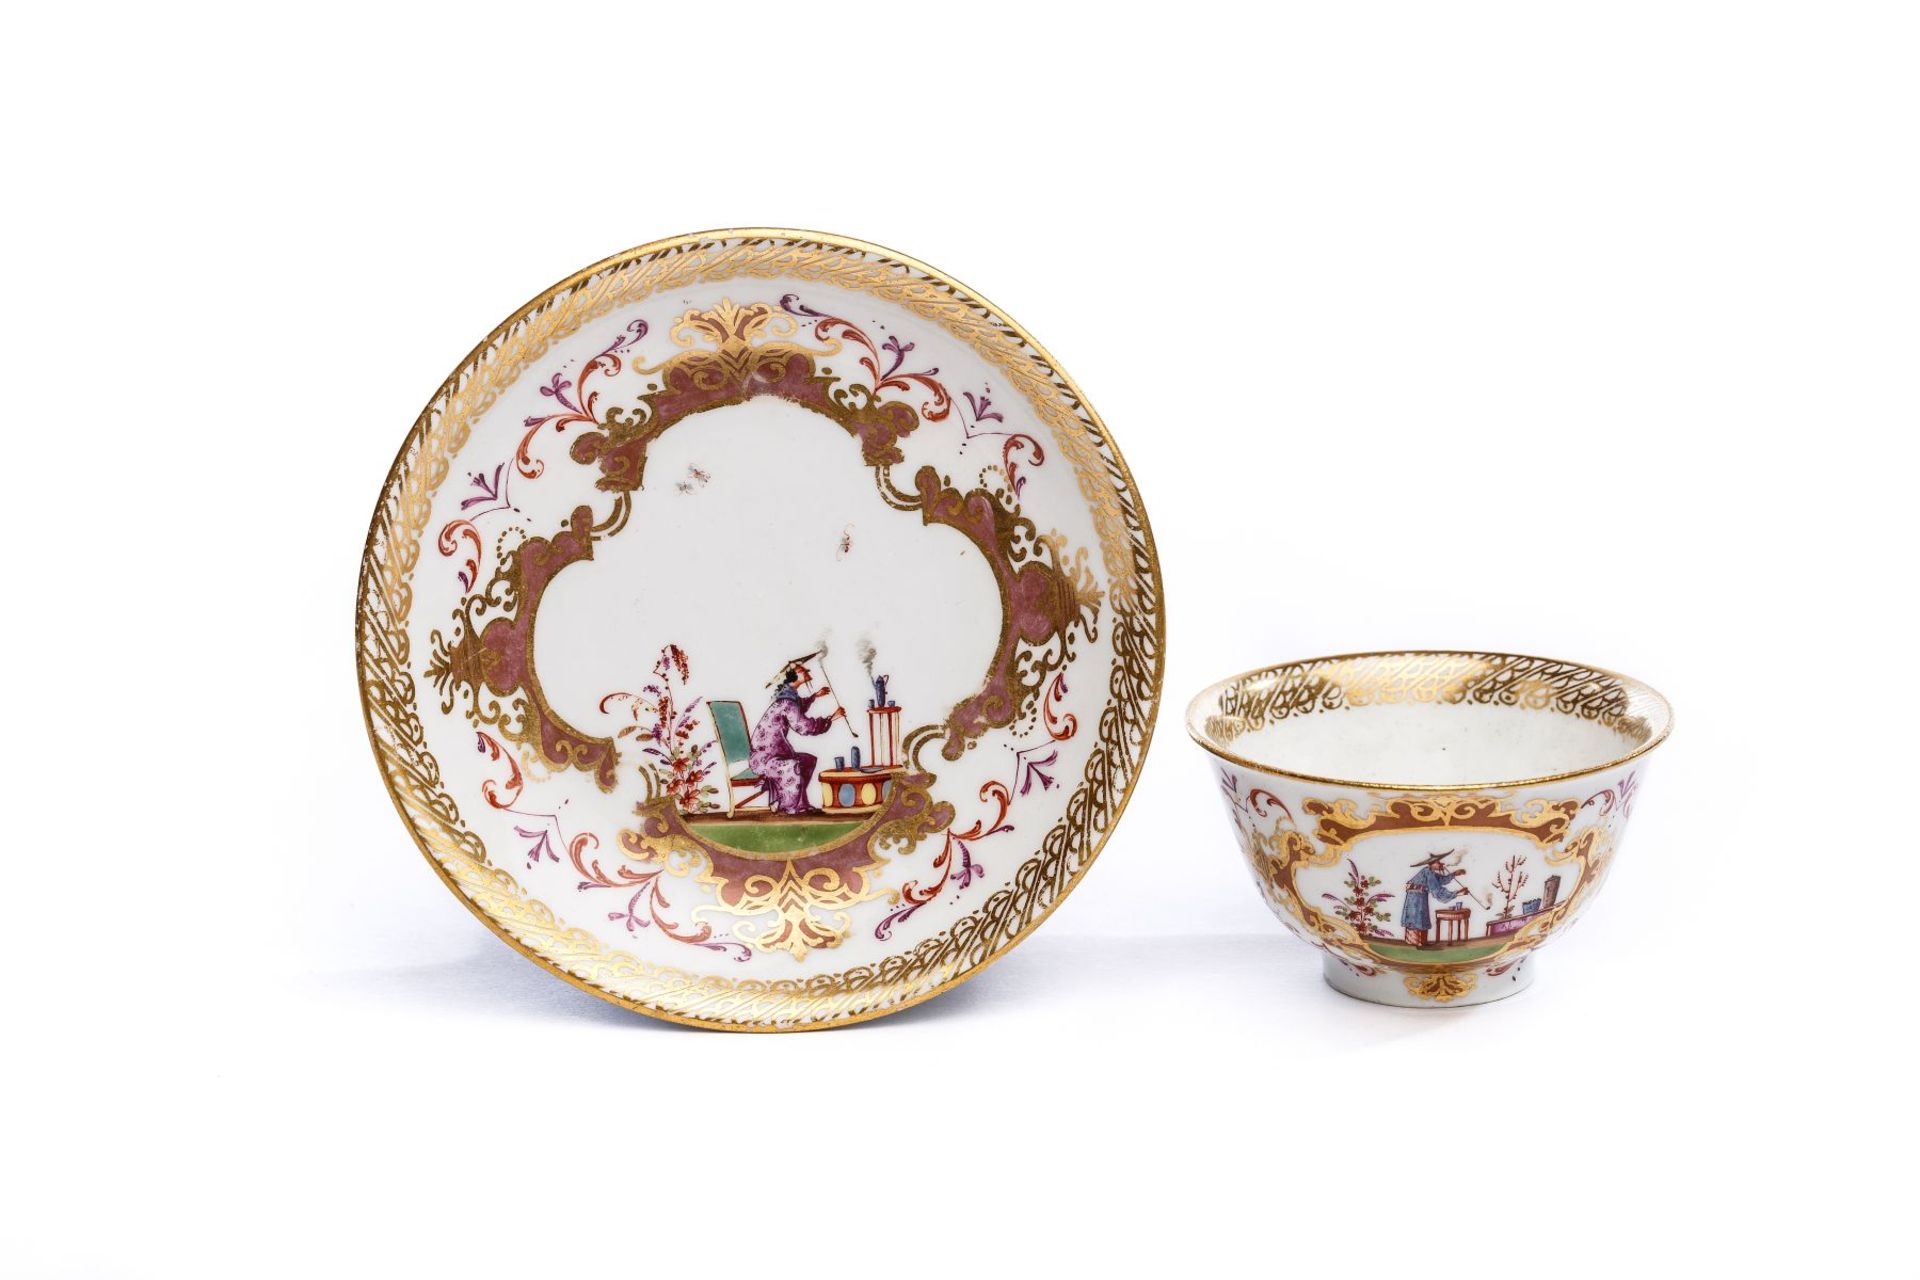 Bowl with Saucer, Meissen 1723/25